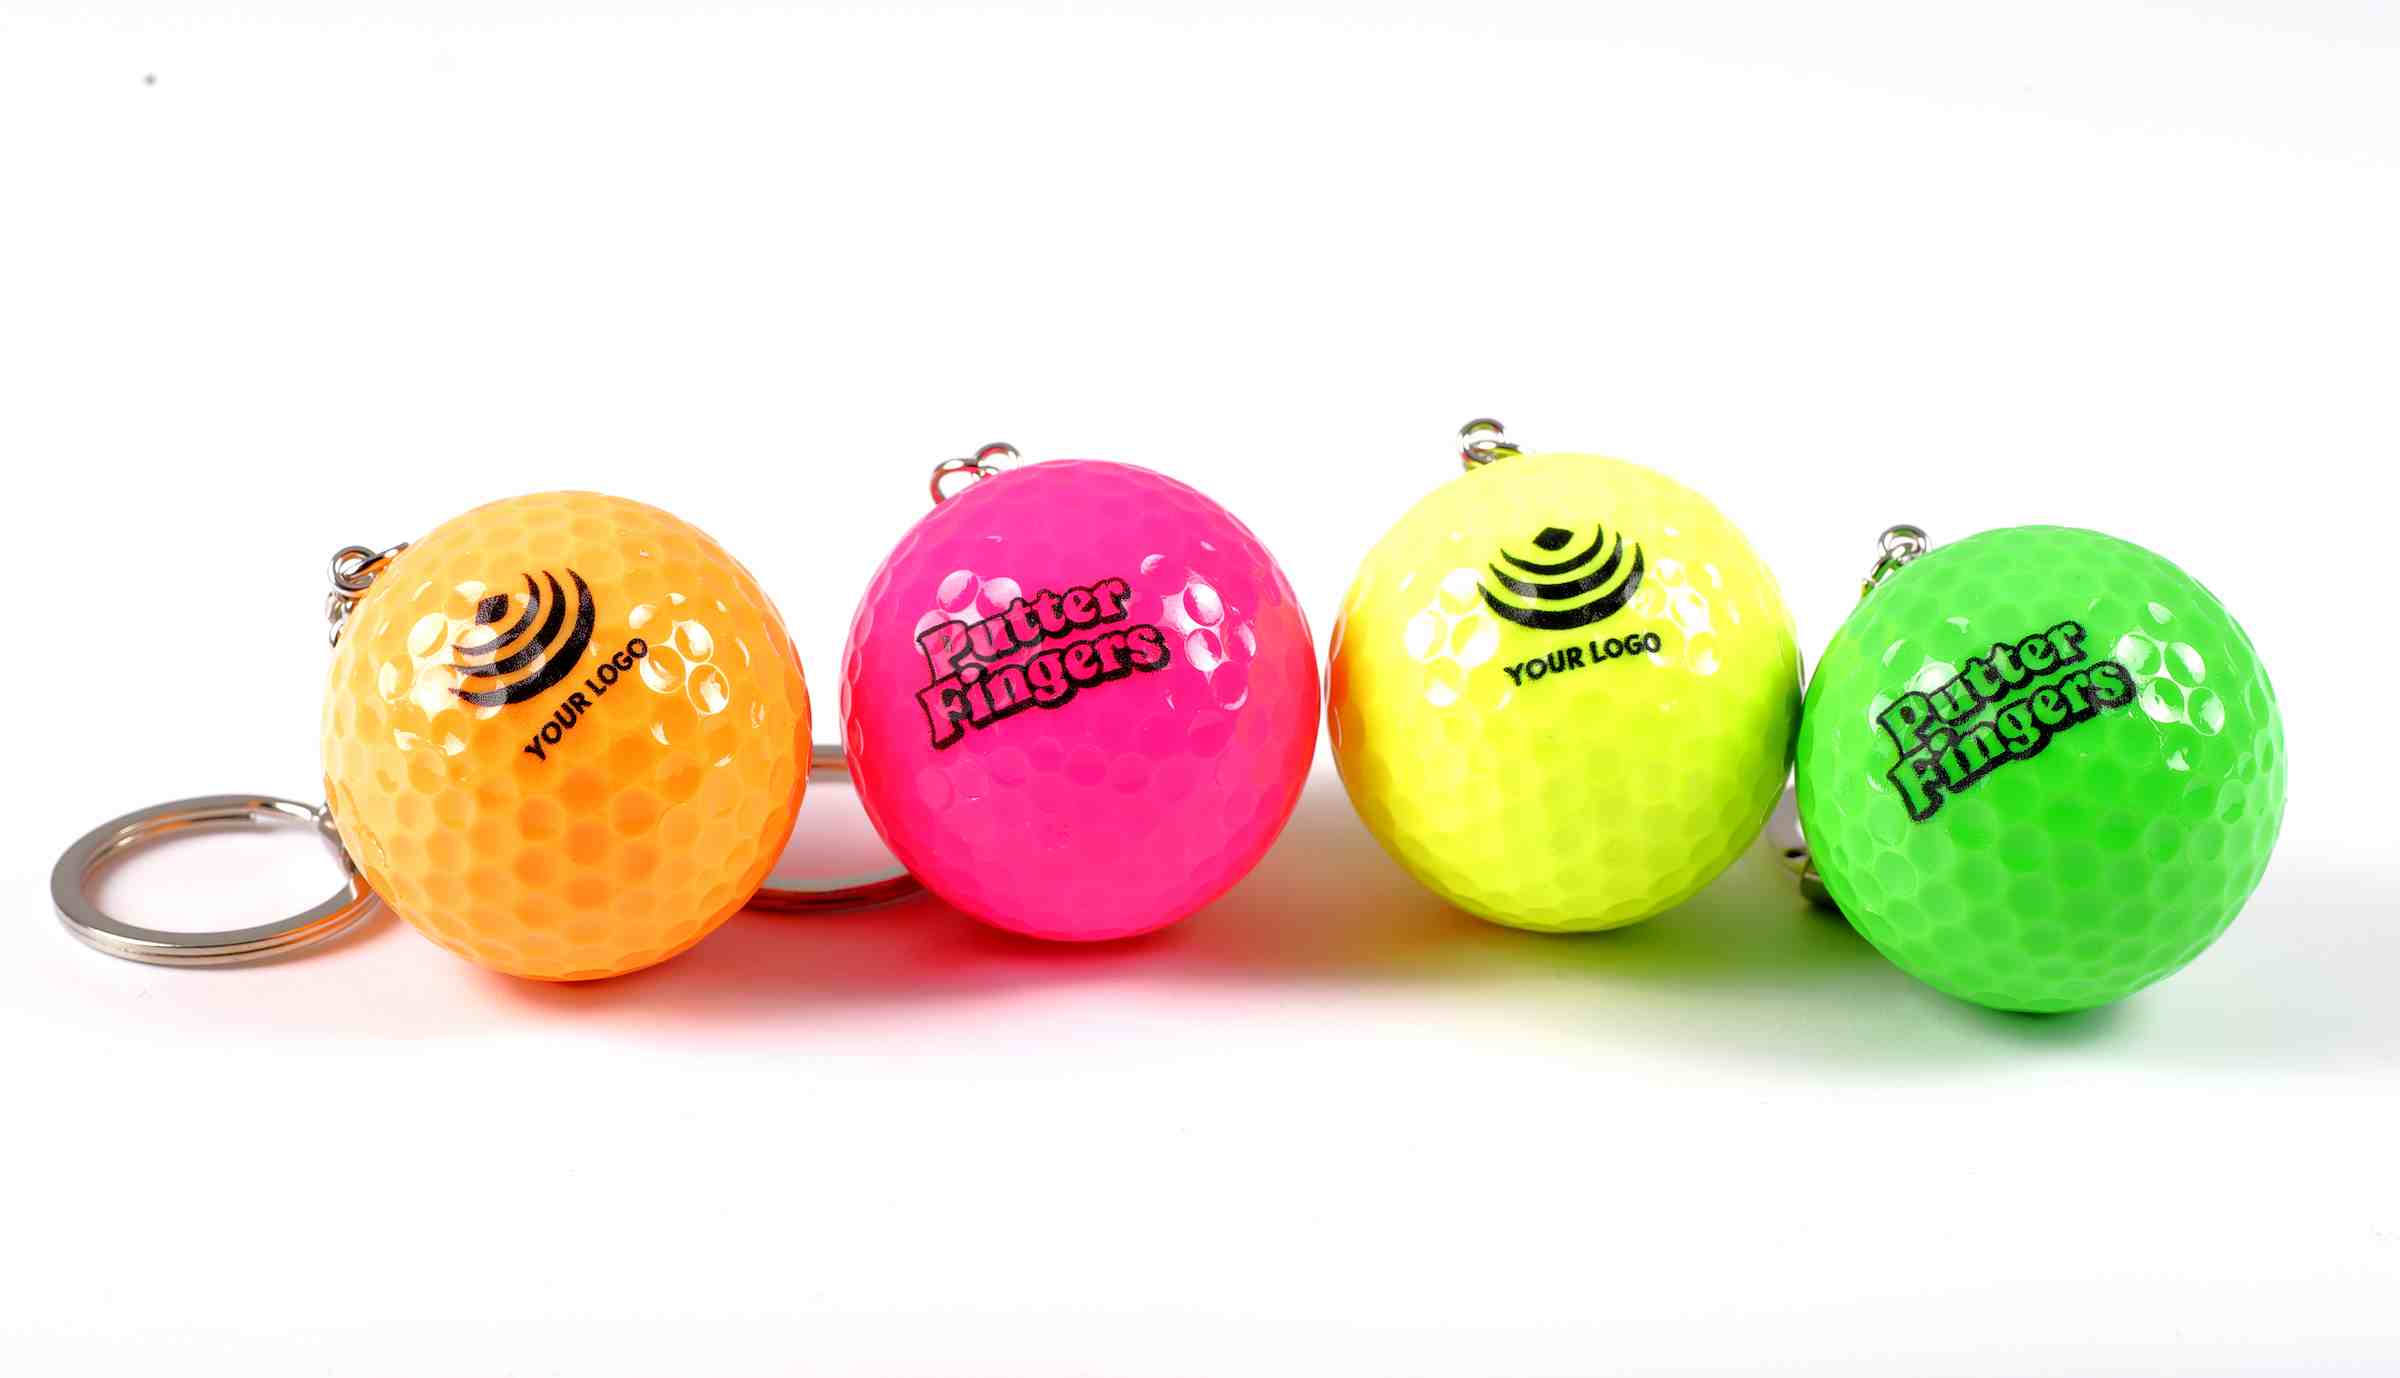 Four mini golf keyrings in vibrant orange, pink, green, and yellow. Two keyrings feature 'Your Logo' text (orange & yellow) with a generic logo, while the other two showcase the Putterfingers branding (pink & green)